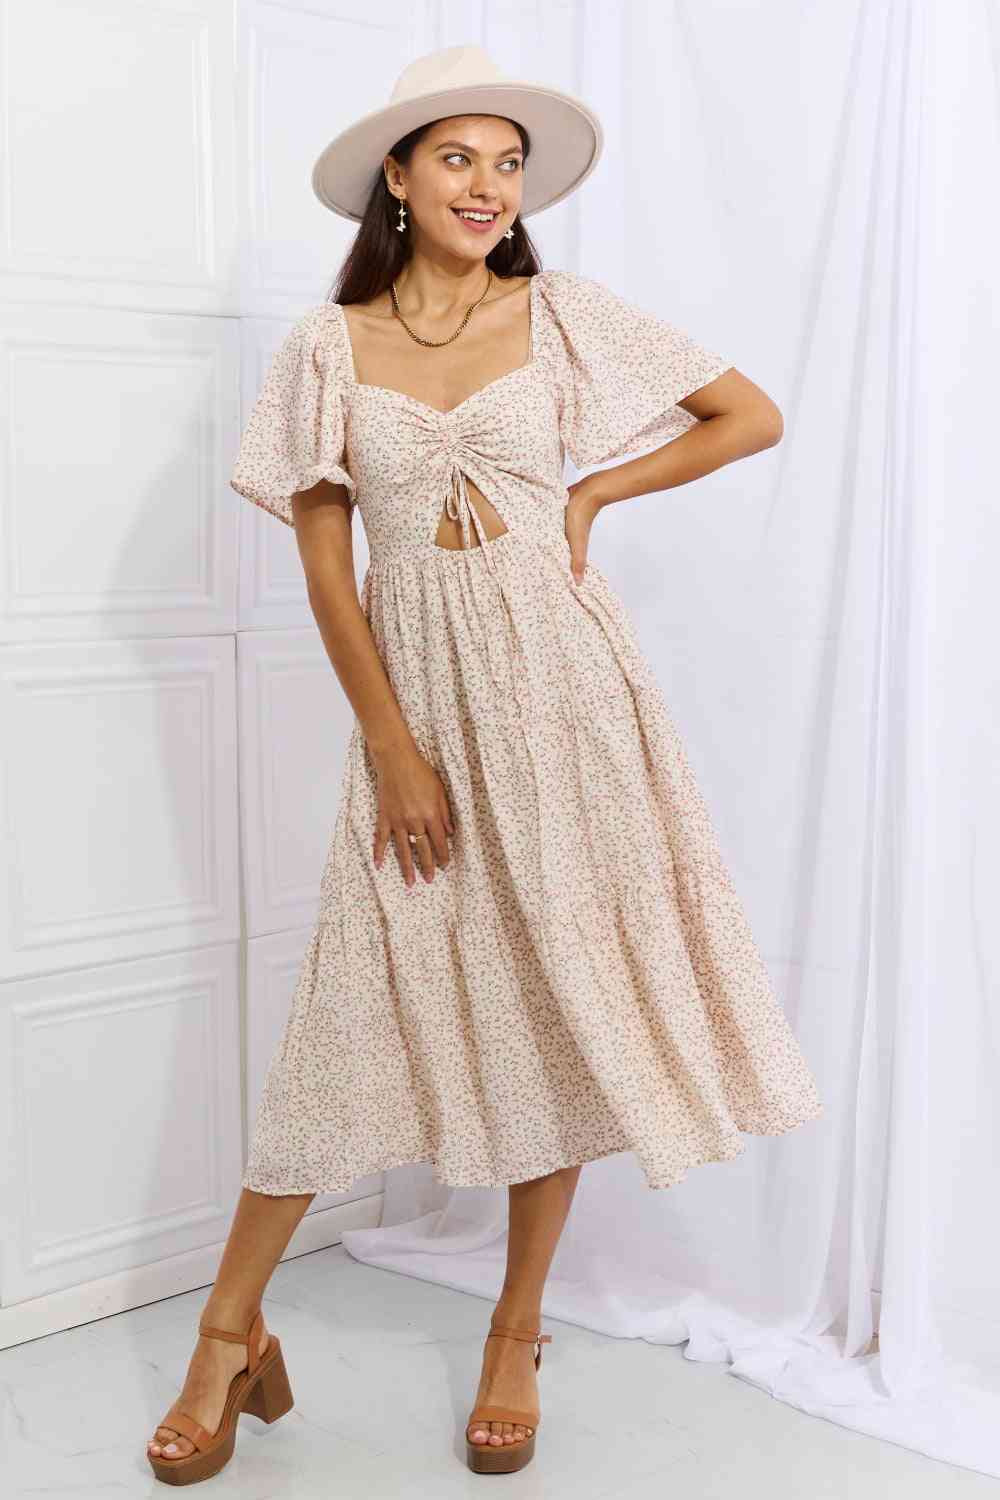 Let It Grow Full Size Floral Tiered Ruffle Midi Dress - Floral / S - All Dresses - Dresses - 1 - 2024